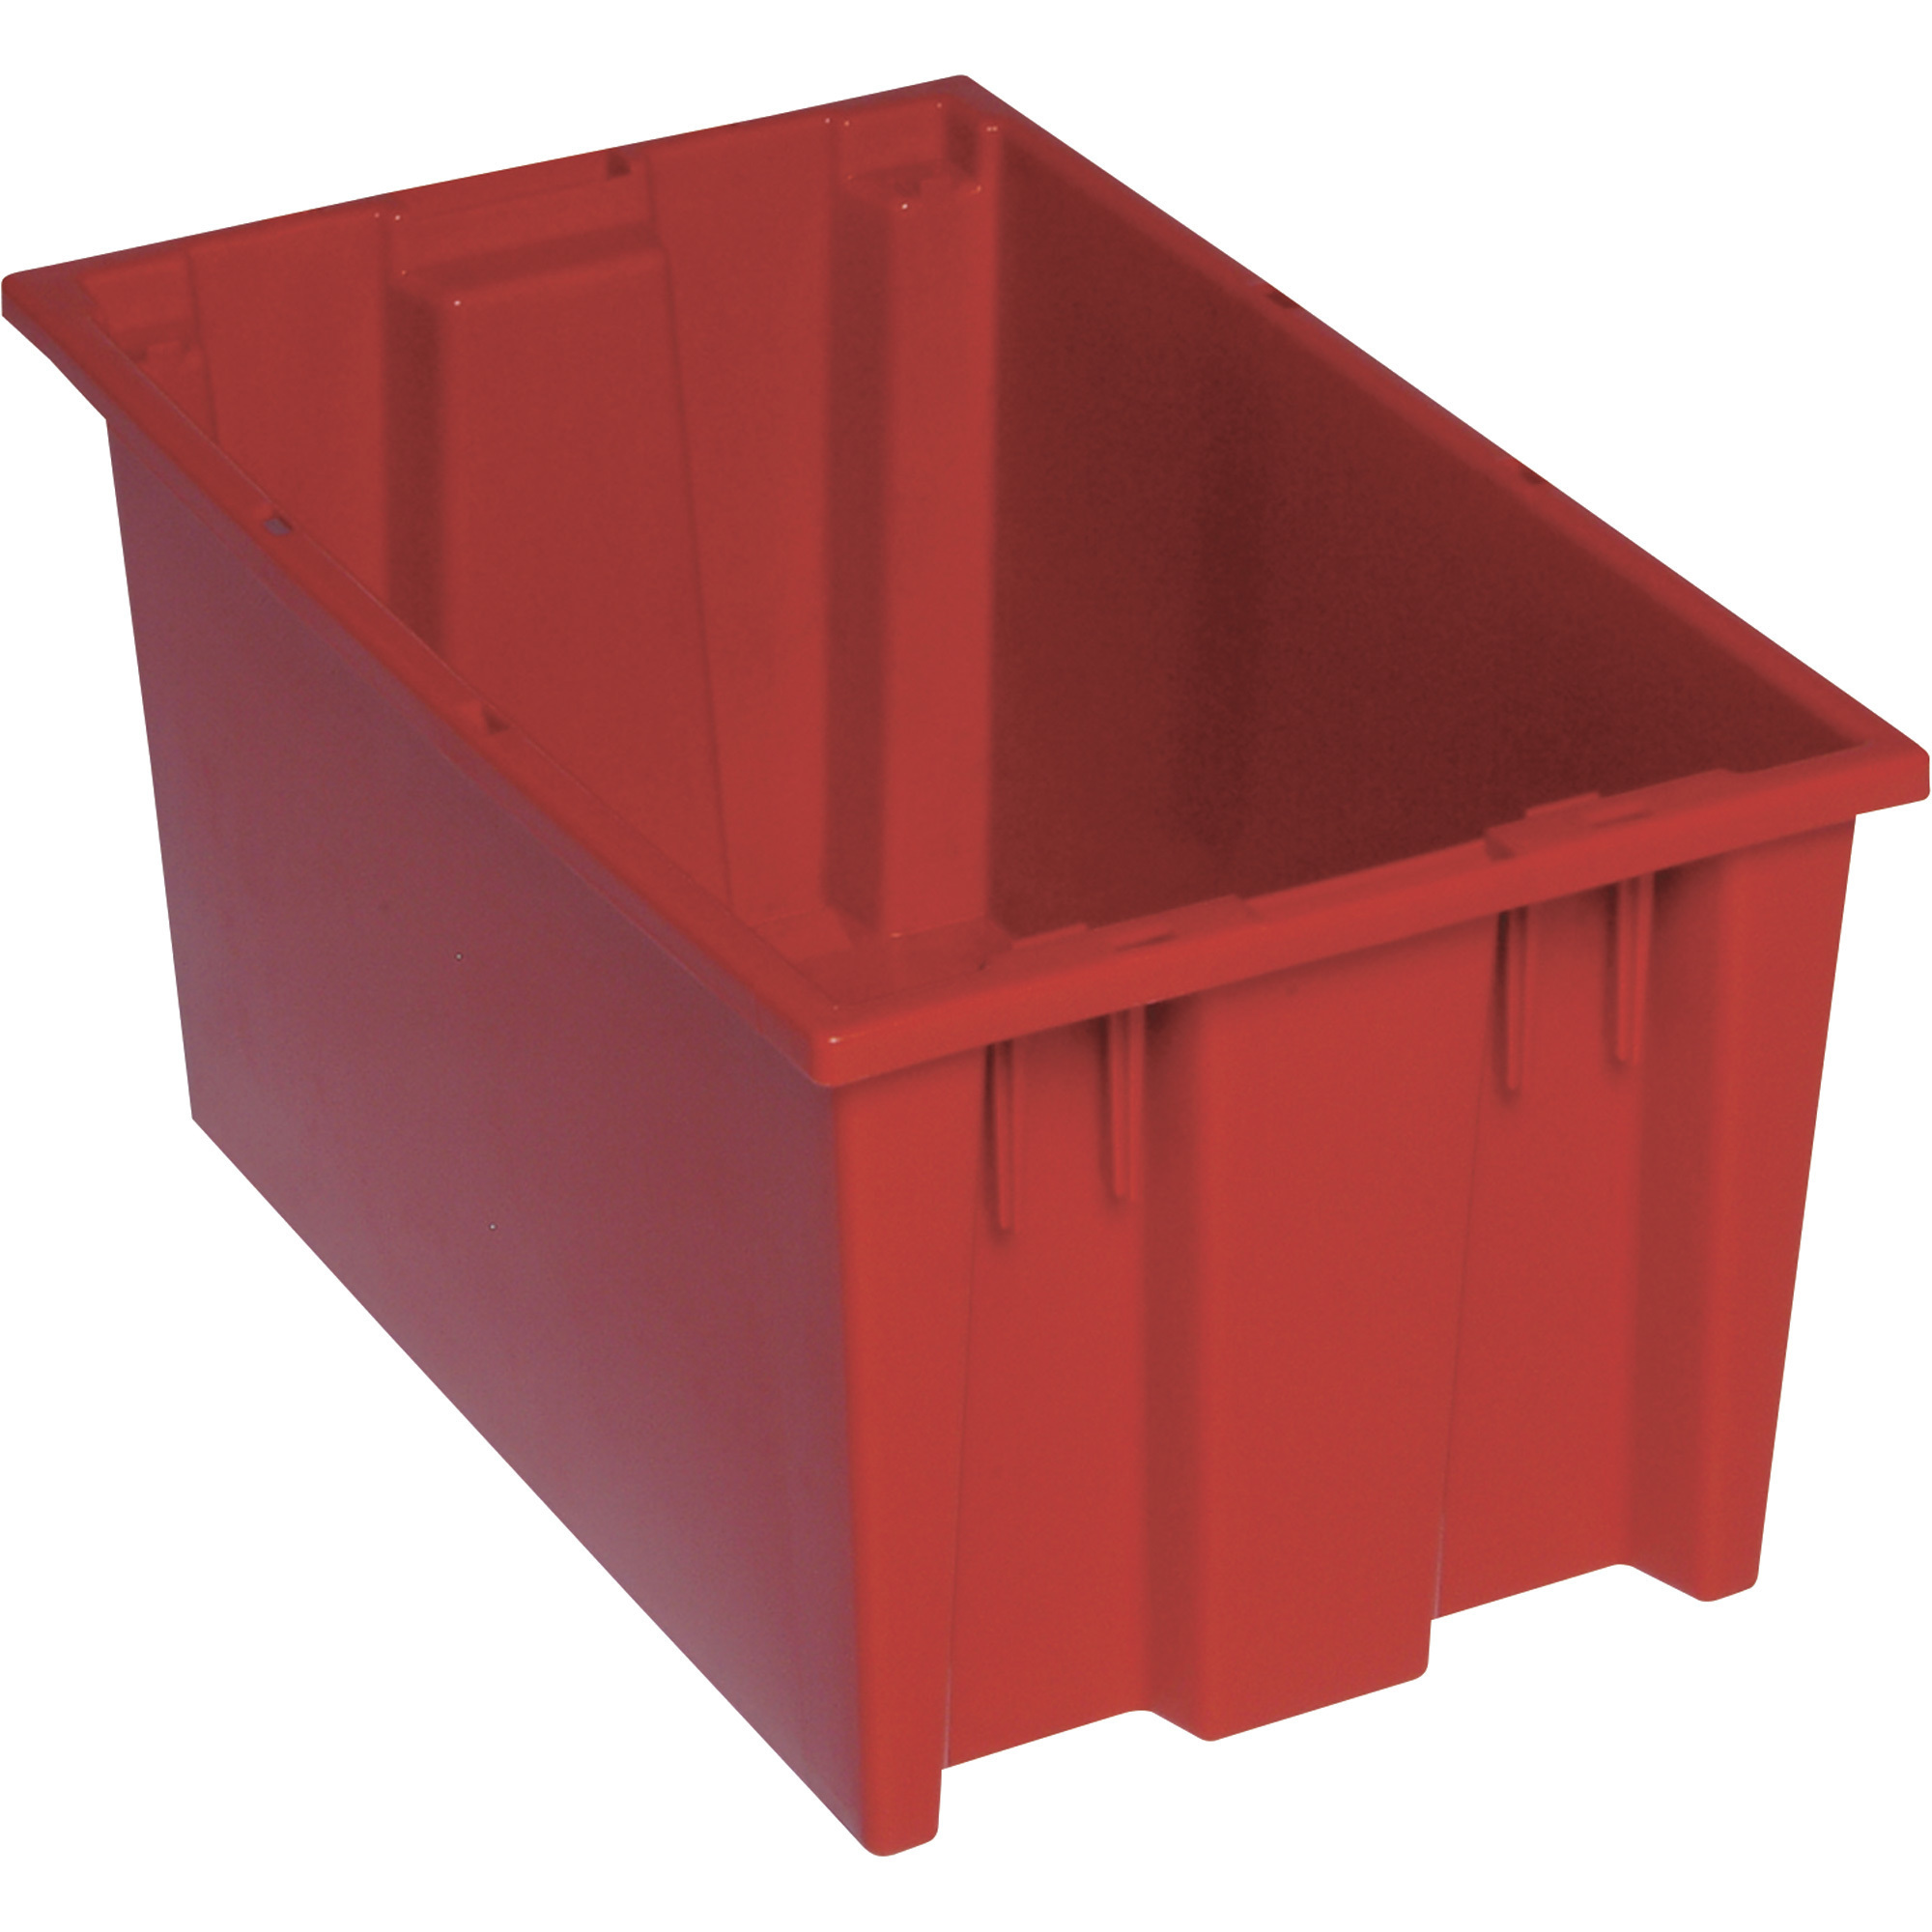 Quantum Storage Stack and Nest Tote Bin, 18Inch x 11Inch x 9Inch Size, Red, Carton of 6, Model SNT185RDCS